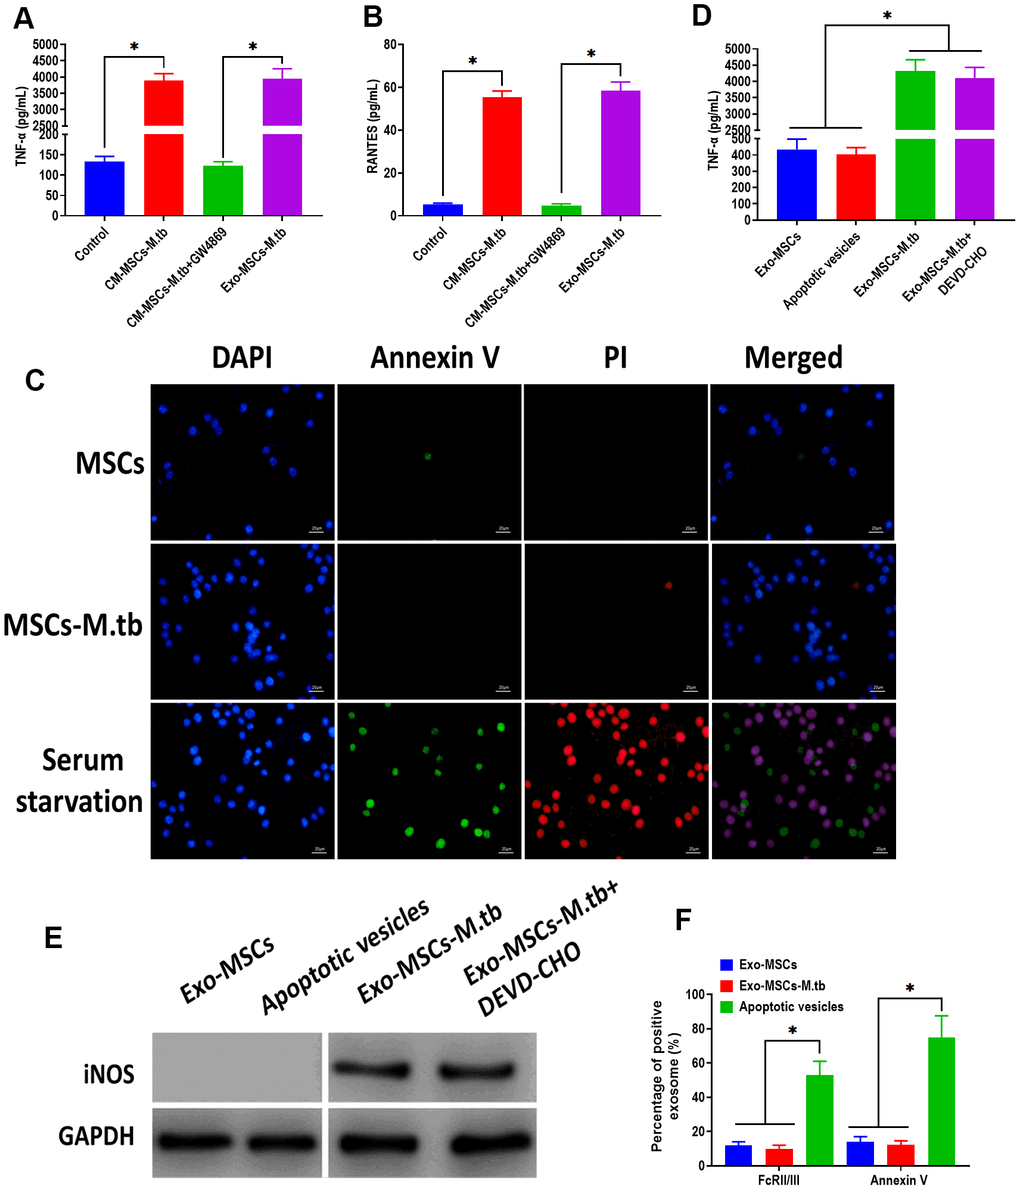 Exo-MSCs-M.tb induced pro-inflammatory response of macrophages. (A) TNF-α levels in macrophages treated with M.tb-infected MSCs-conditioned medium (CM-MSCs-M.tb), M.tb-infected MSCs-CM plus GW4869, and Exo-MSCs-M.tb (20μg). (B) RANTES-α levels in macrophages treated with M.tb-infected MSCs-CM, M.tb-infected MSCs-CM plus GW4869, and Exo-MSCs-M.tb (20μg). (C) Apoptotic level of macrophages treated with PBS (control), Exo-MSCs-M.tb (20μg), and serum-deprivation treatment. Macrophages were stained with DAPI (blue), annexin V (green), and PI (red). Scale bar: 20 μm. (D) TNF-α levels in macrophages treated with apoptotic vesicles, Exo-MSCs-M.tb (20μg), and Exo-MSCs-M.tb plus DEVD-CHO (caspase-3 inhibitor), as detected by ELISA assay 24 hours after exosome treatment. (E) iNOS levels in macrophages treated with apoptotic vesicles, Exo-MSCs-M.tb (20μg), and Exo-MSCs-M.tb plus DEVD-CHO (caspase-3 inhibitor), as detected by western blotting assay. (F) Annexin V and FcRII/III levels in exosomes derived from MSCs or M.tb-infected MSCs, and apoptotic vesicles, as detected by flow cytometer. *p 